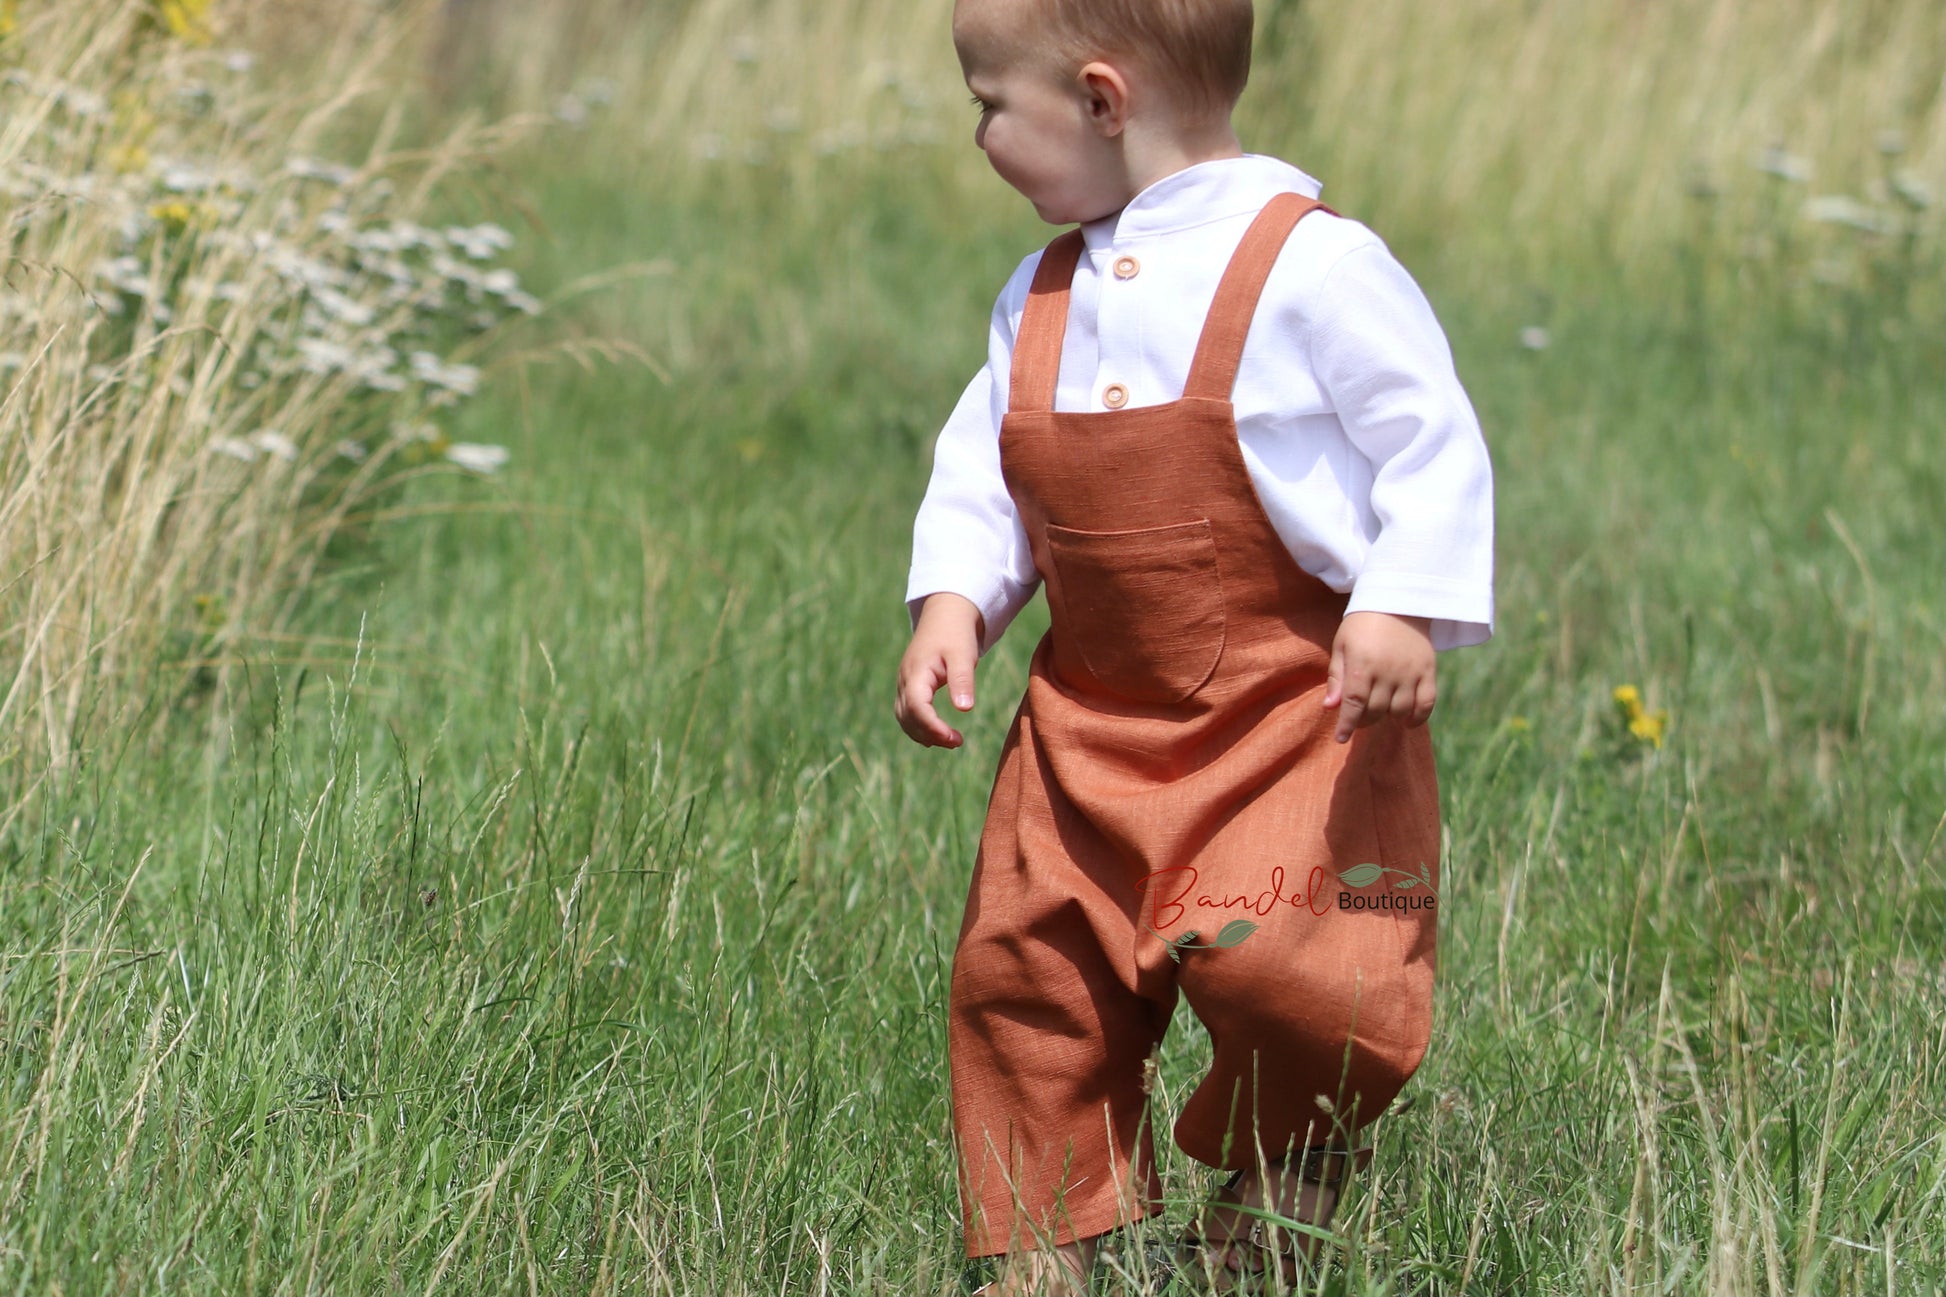 Rust Linen baby romper dungarees feature 3/4 length shorts with a traditional curved front pocket. The elastic back waistband and adjustable tie straps provide a secure fit, and the wooden button closure at the back creates a stylish look.